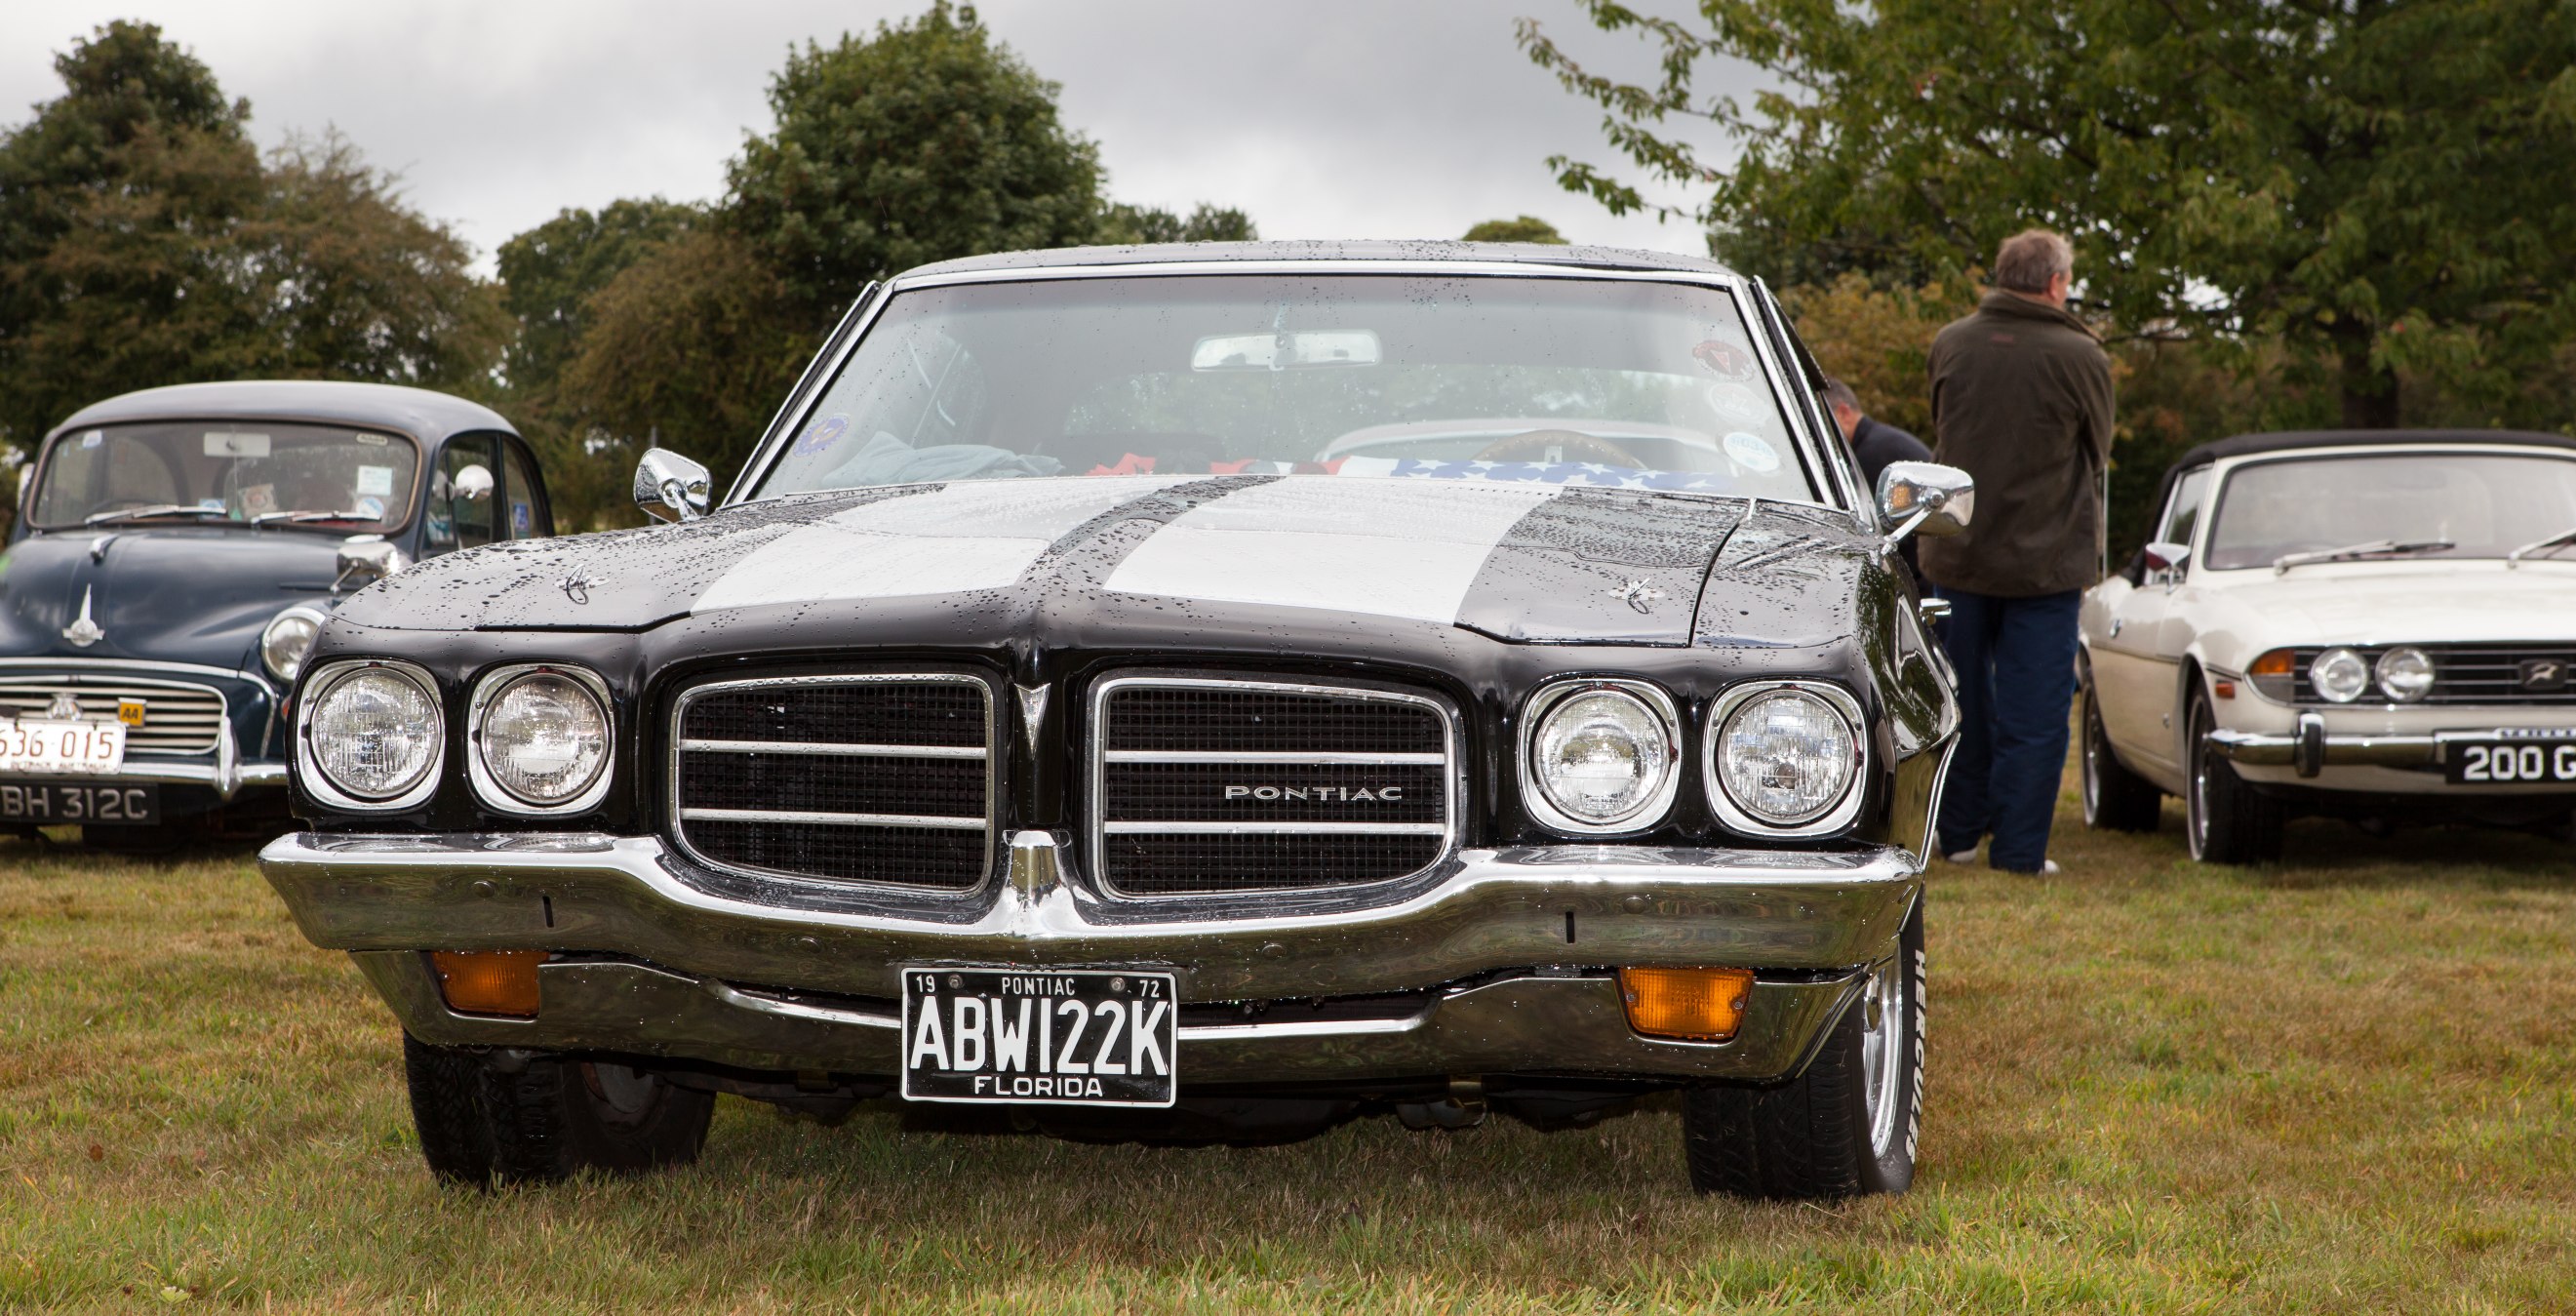 a silver car parked in a grassy field